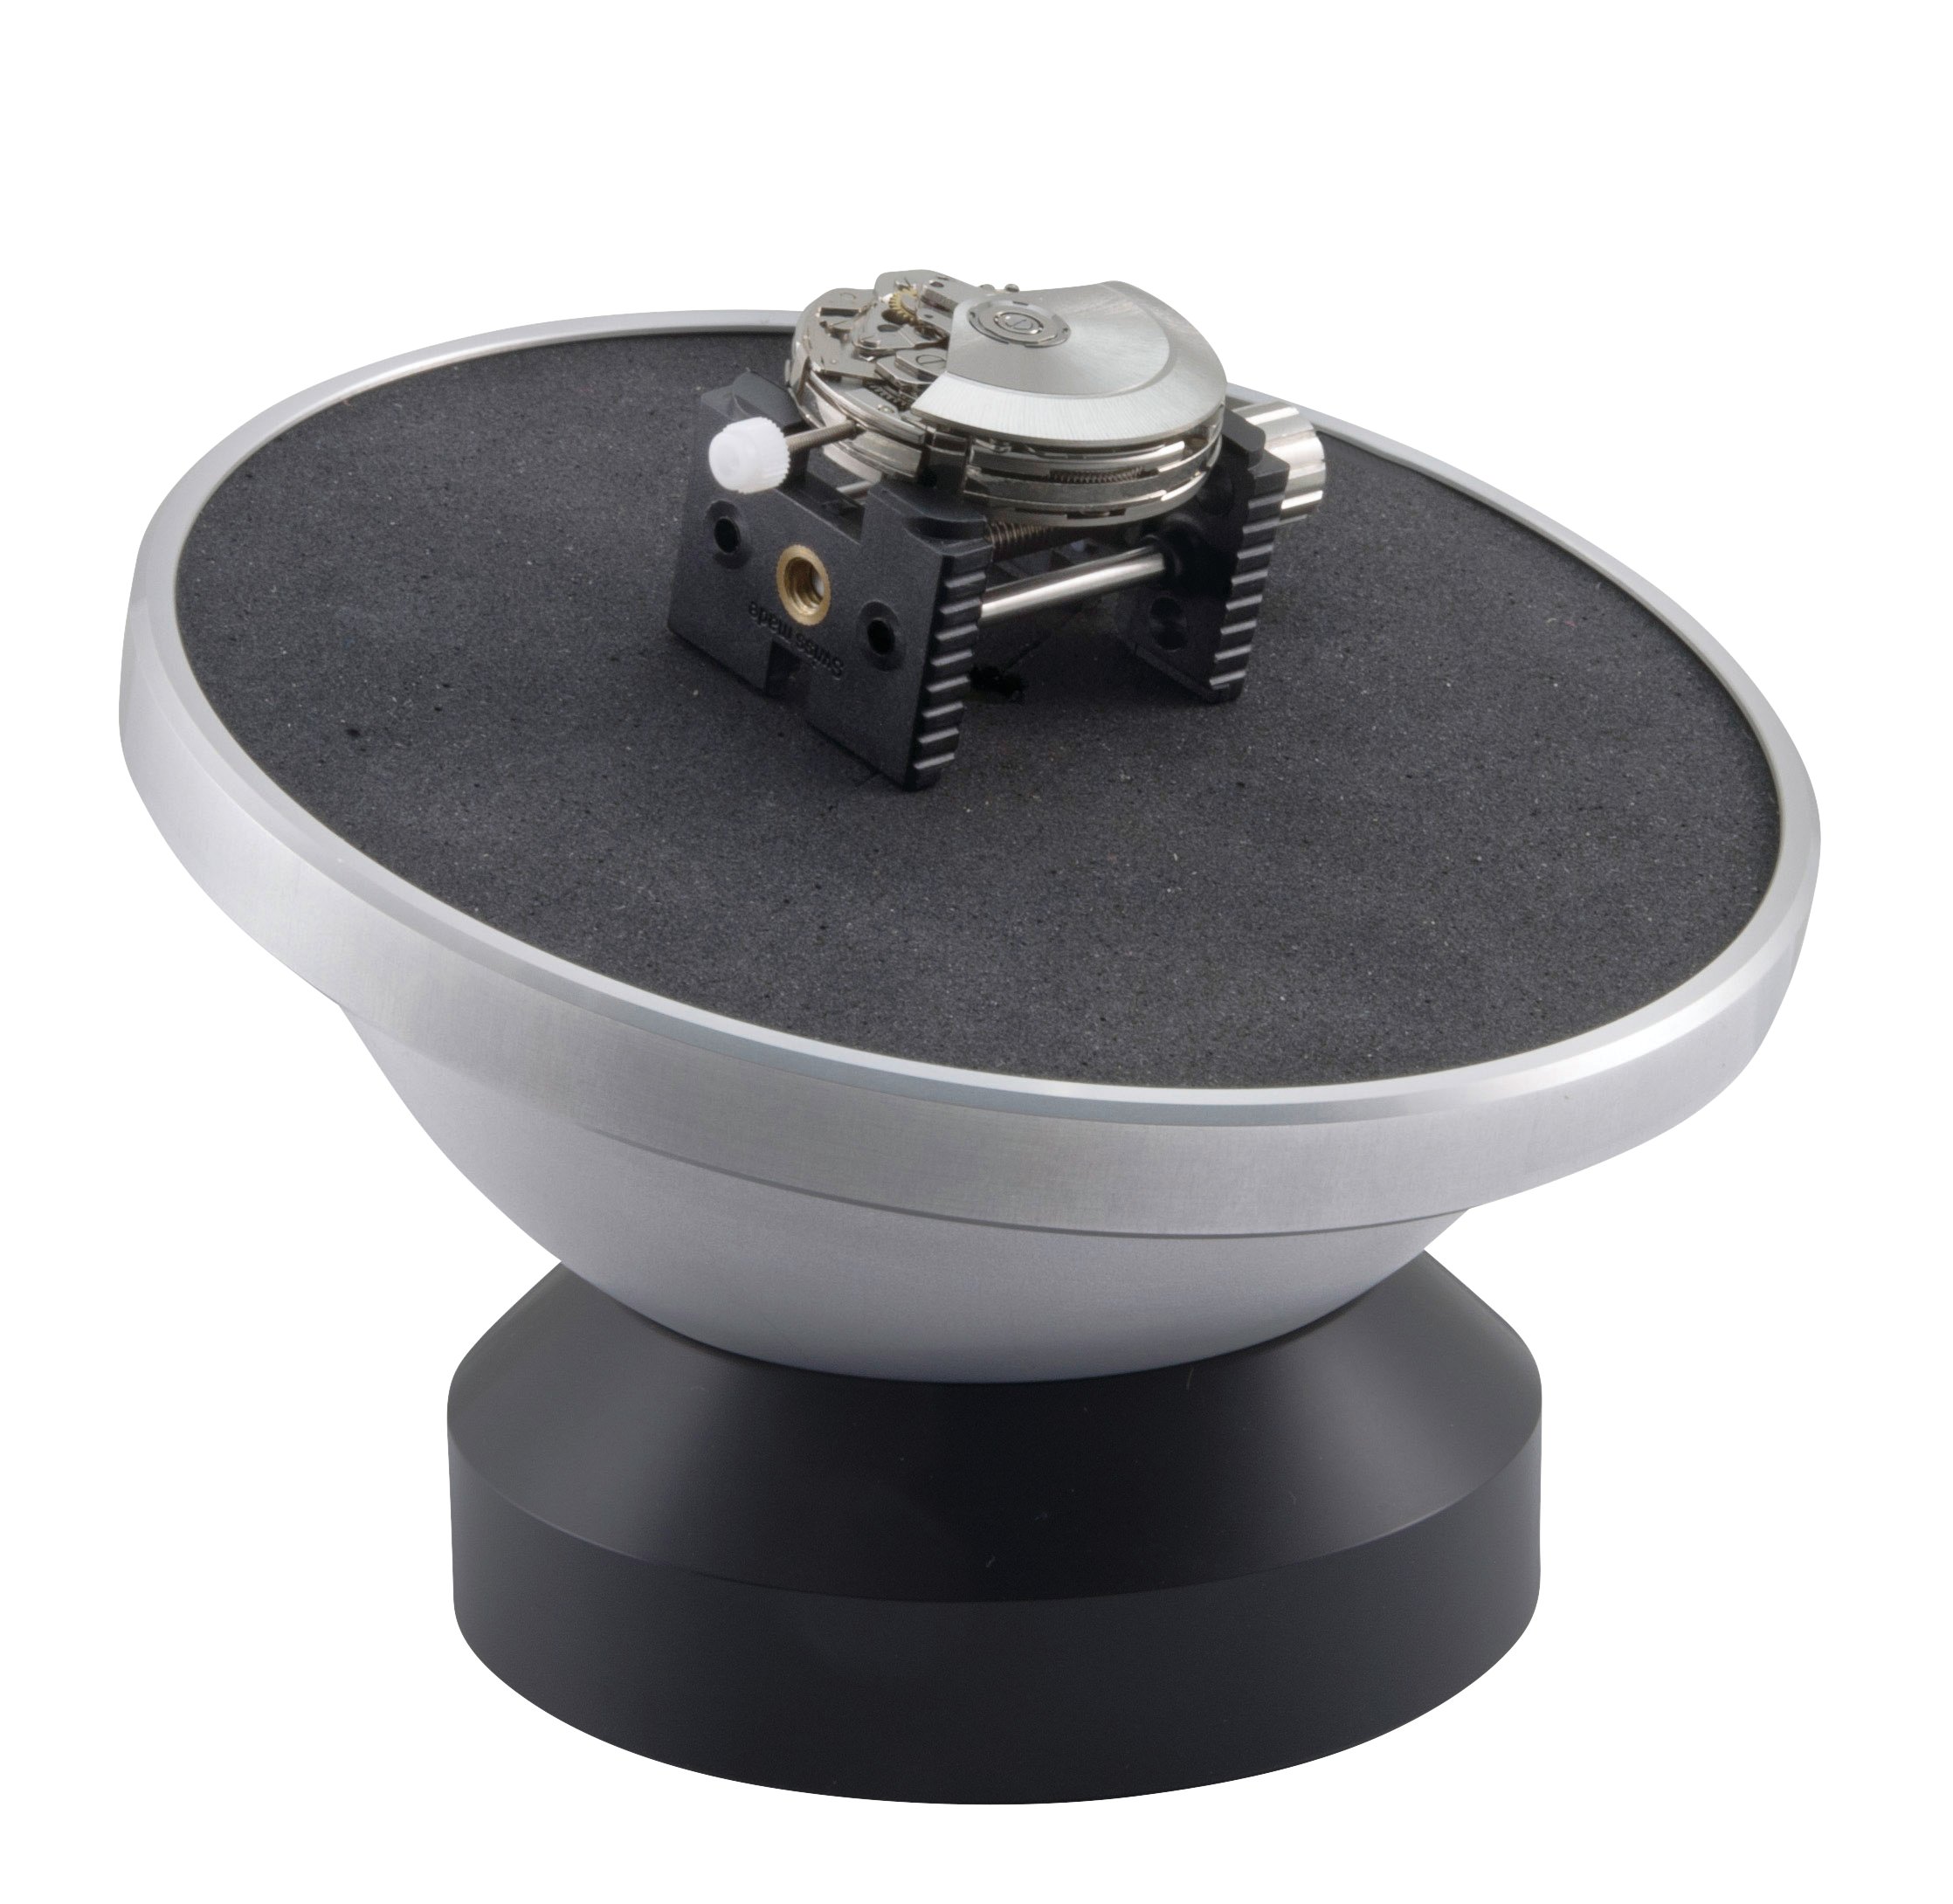 Beco® Technic Watchmaker's Orientation Table 120 mm